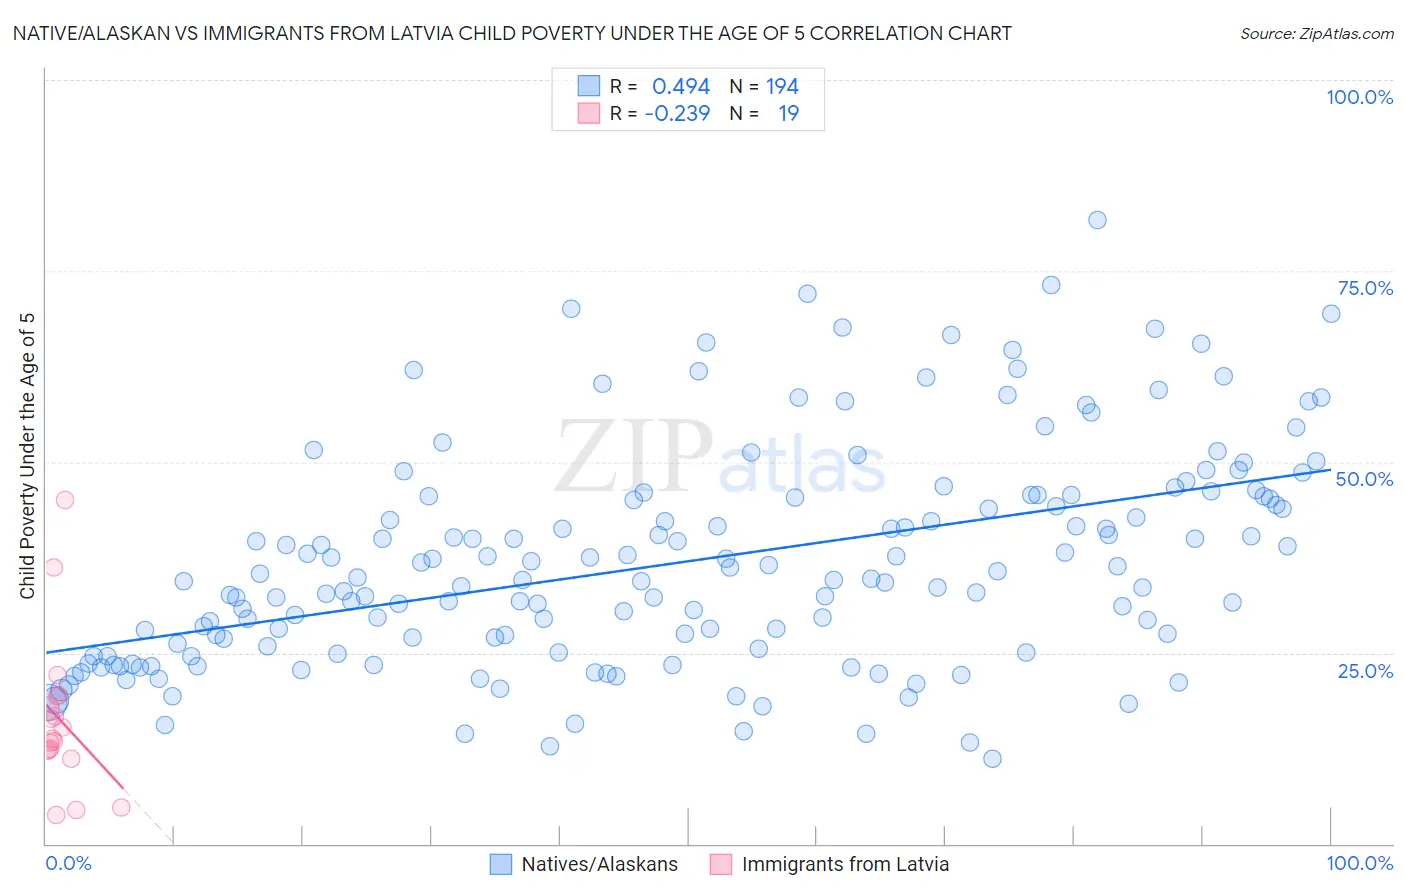 Native/Alaskan vs Immigrants from Latvia Child Poverty Under the Age of 5